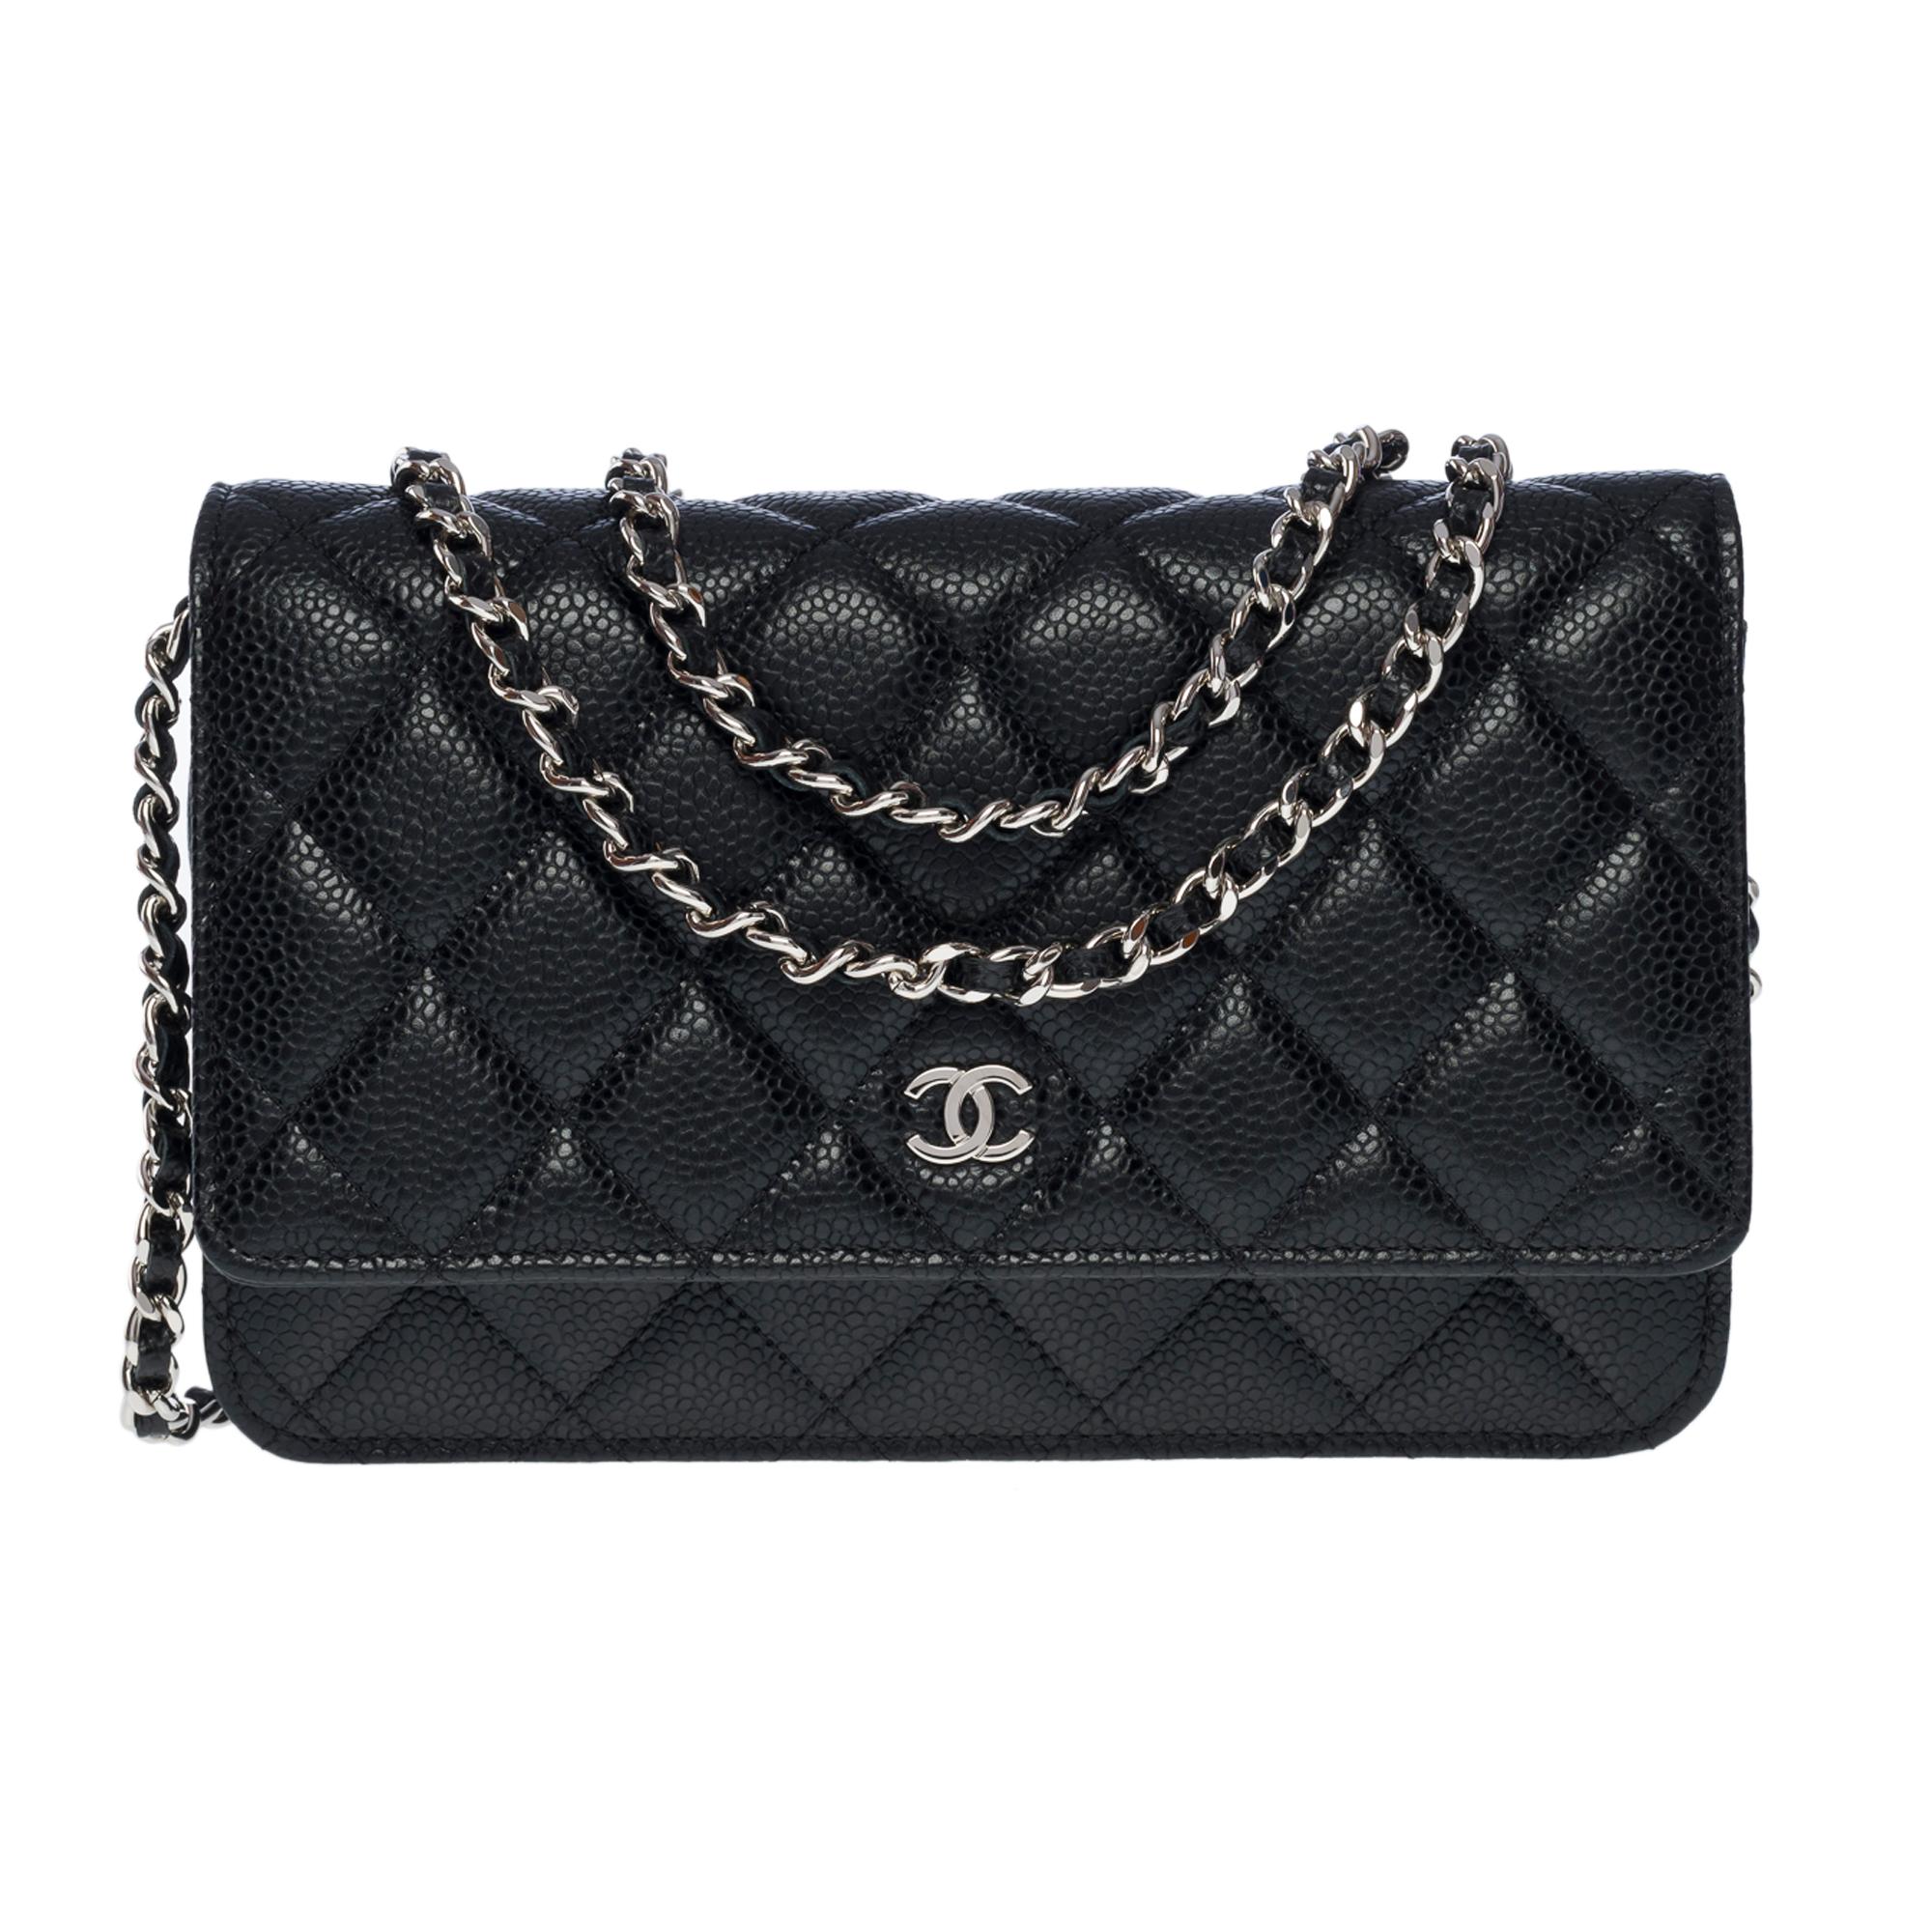 Lovely Chanel Wallet On Chain (WOC) shoulder bag in black caviar quilted leather, silver metal hardware, a gold-plated metal chain handle interwoven with black leather for a shoulder and crossbody carry


Gold Metal Flap Closure
A patch pocket at